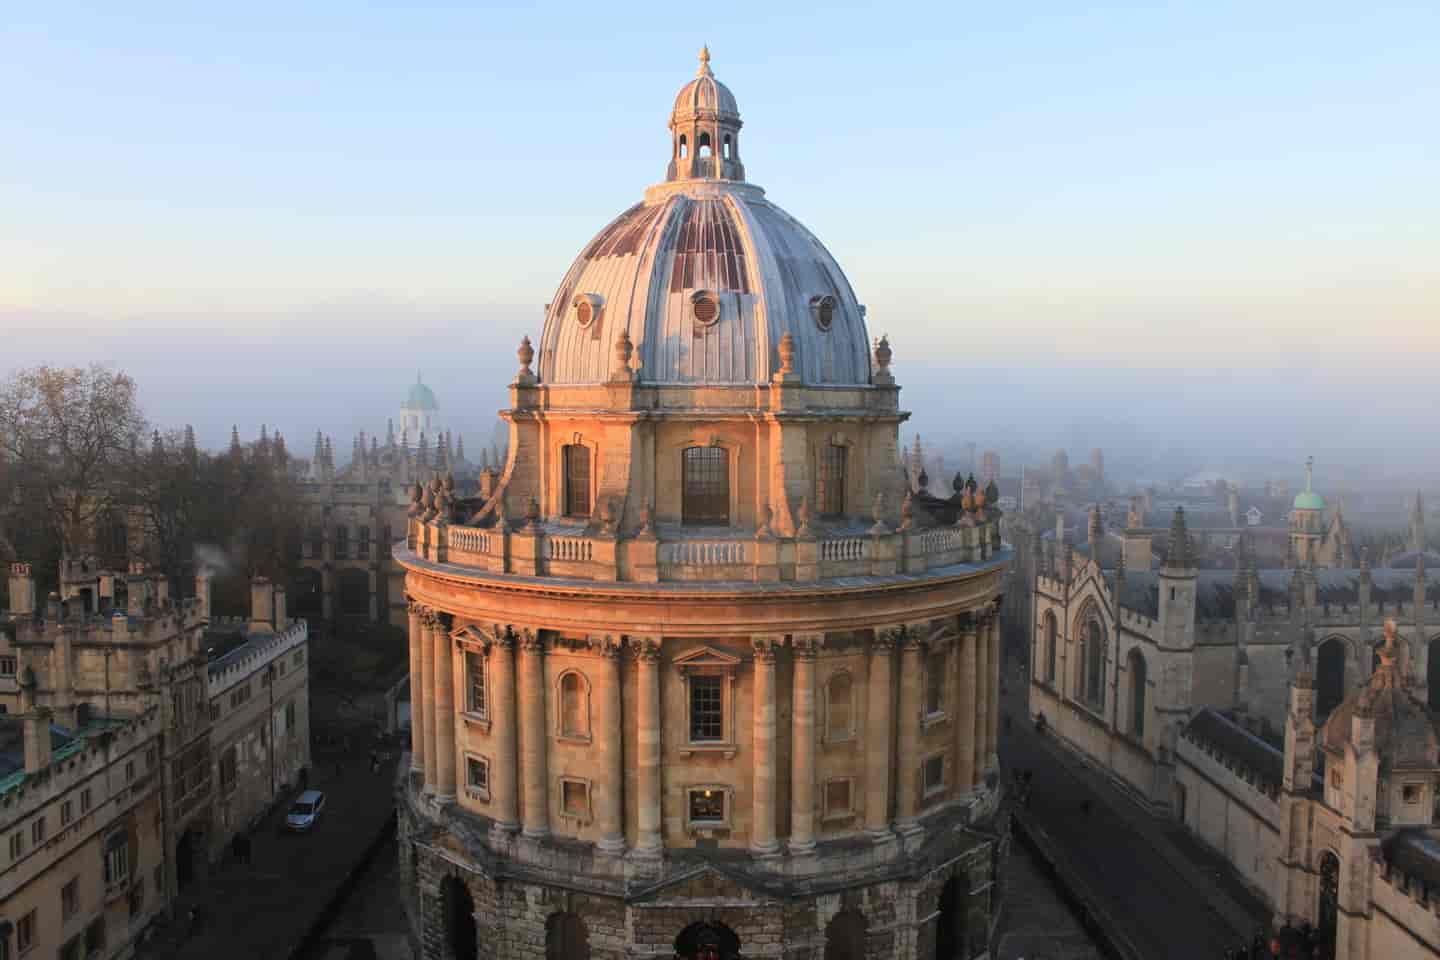 Student Accommodation in Oxford - Second-largest library in Britain, the Bodleian Library